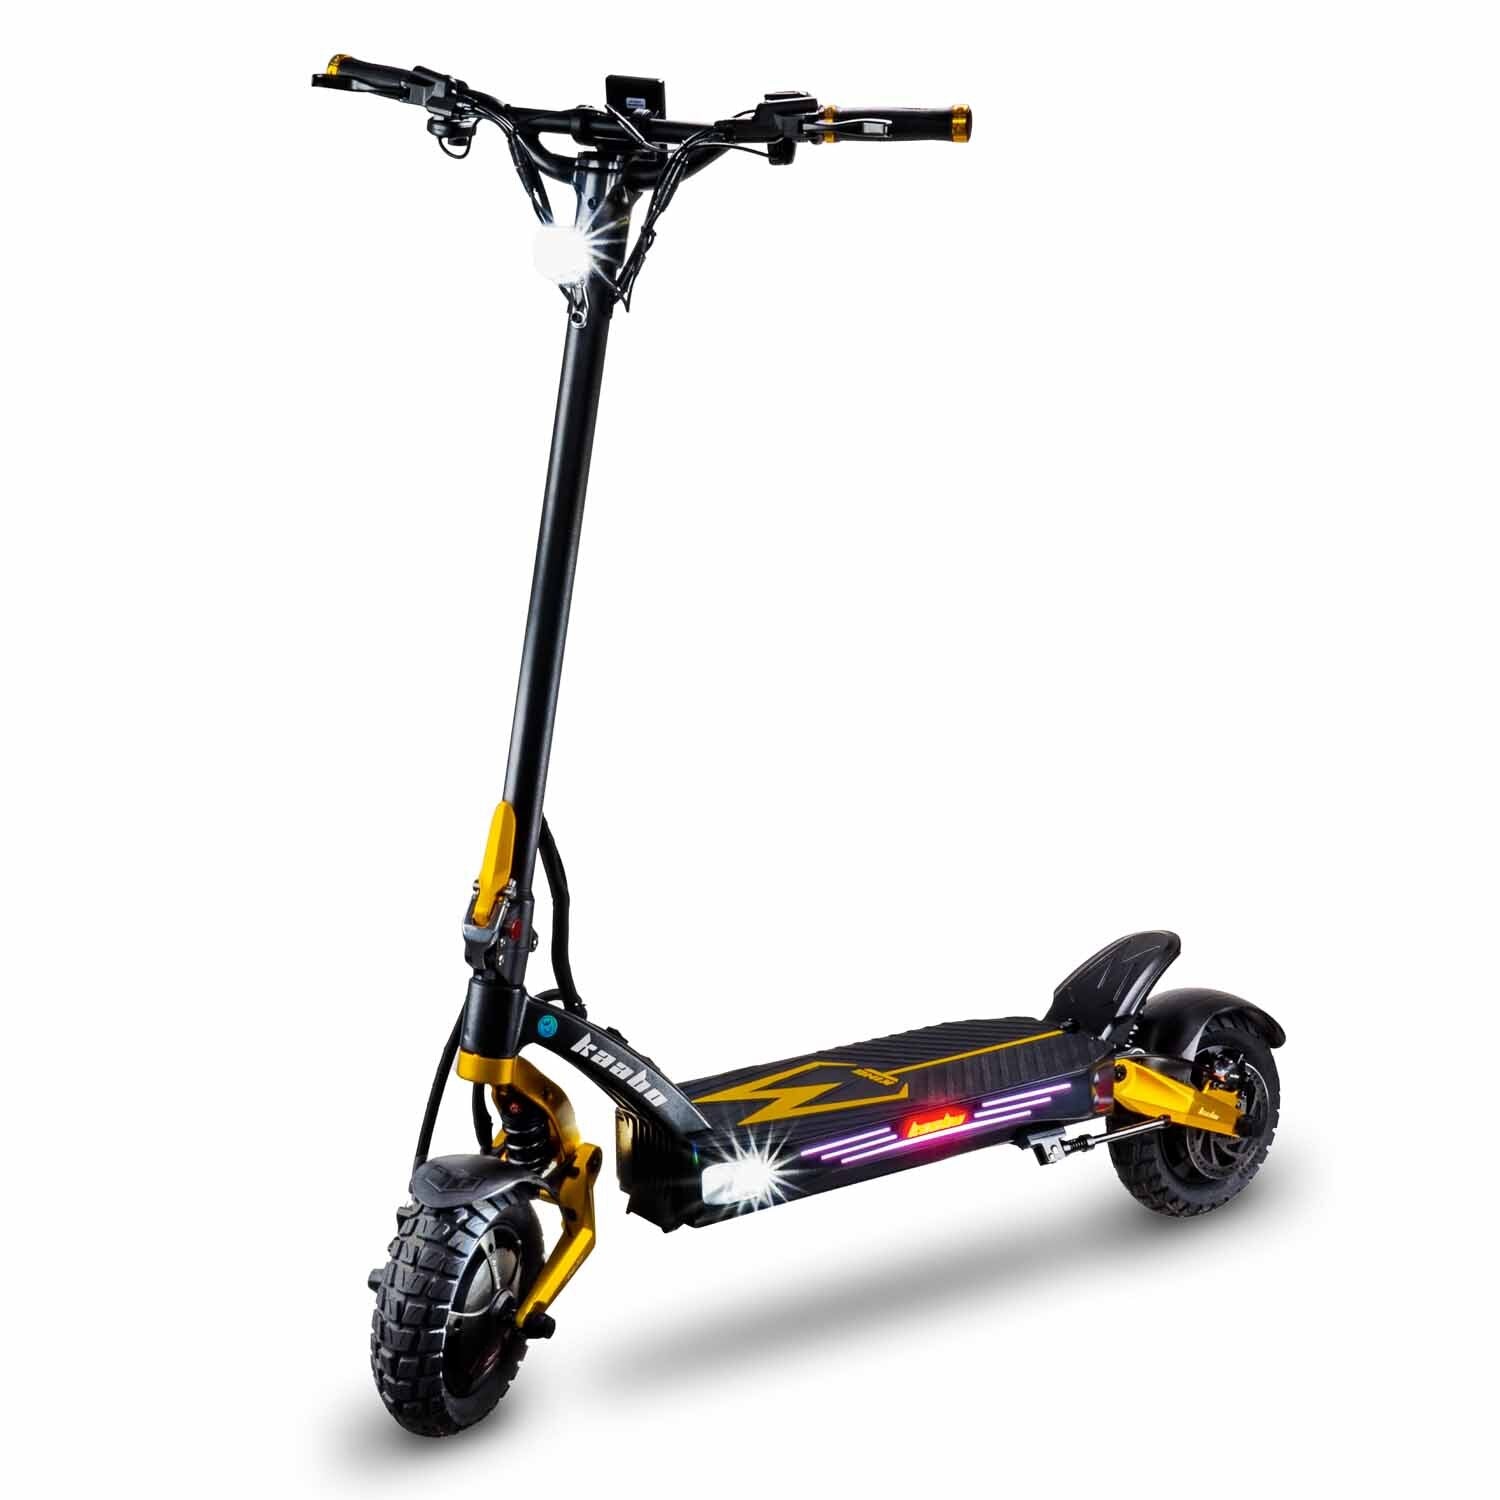 Best Kaabo Electric Scooters - Mantis King GT Gold kaabo scooter - electric scooters for adults